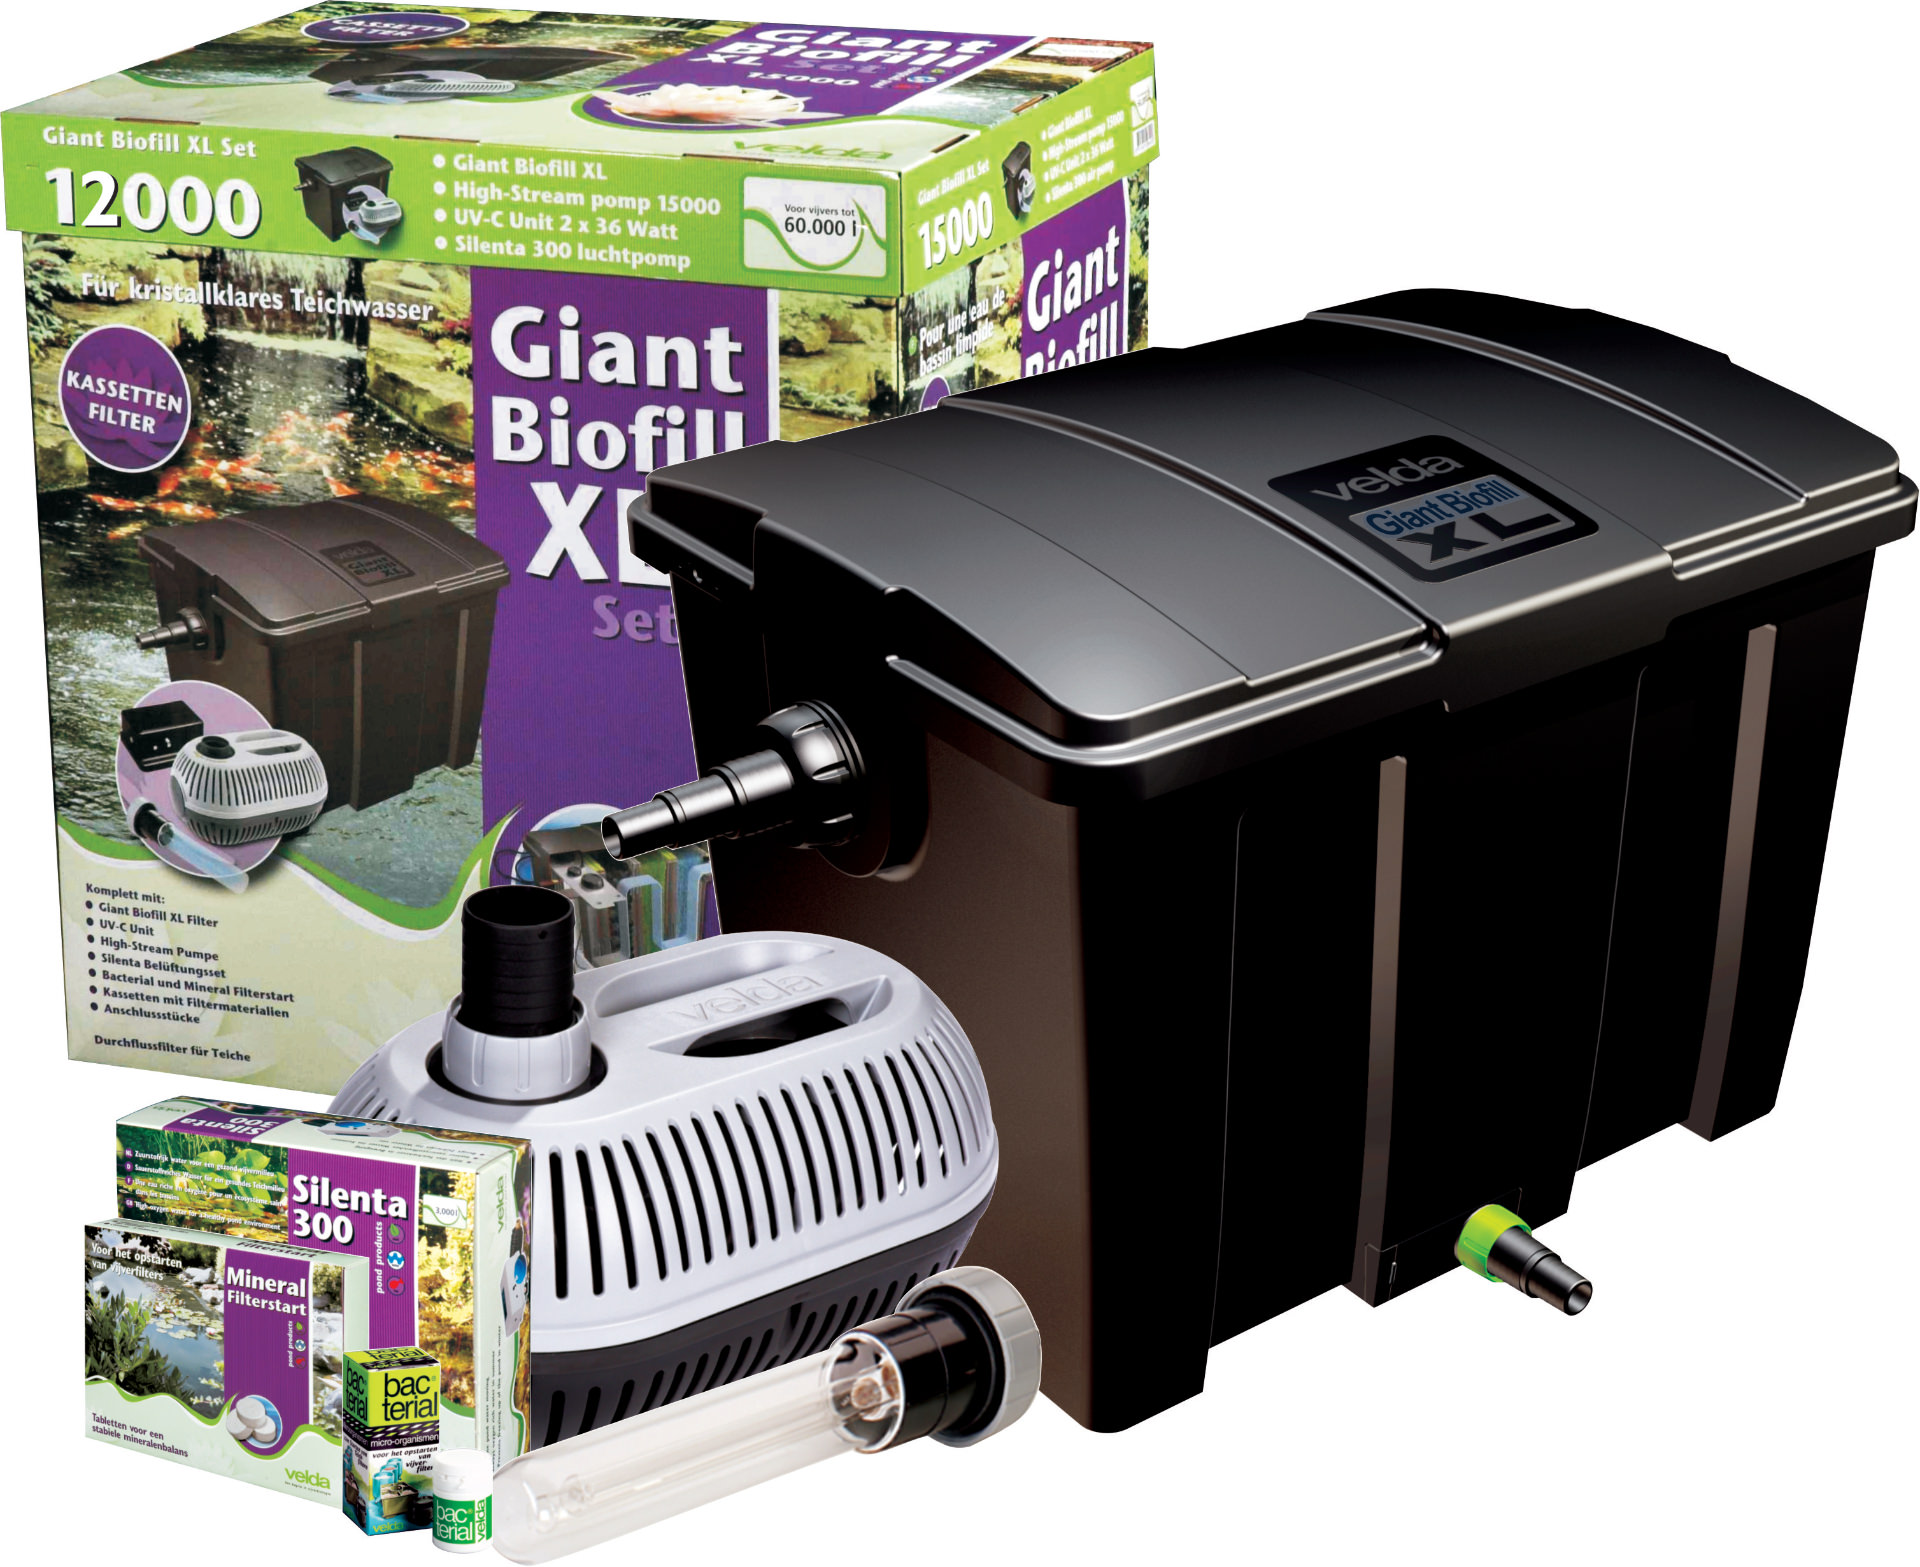 Velda, Giant Biofill XL Set 6000, for ponds up to 20000 litres